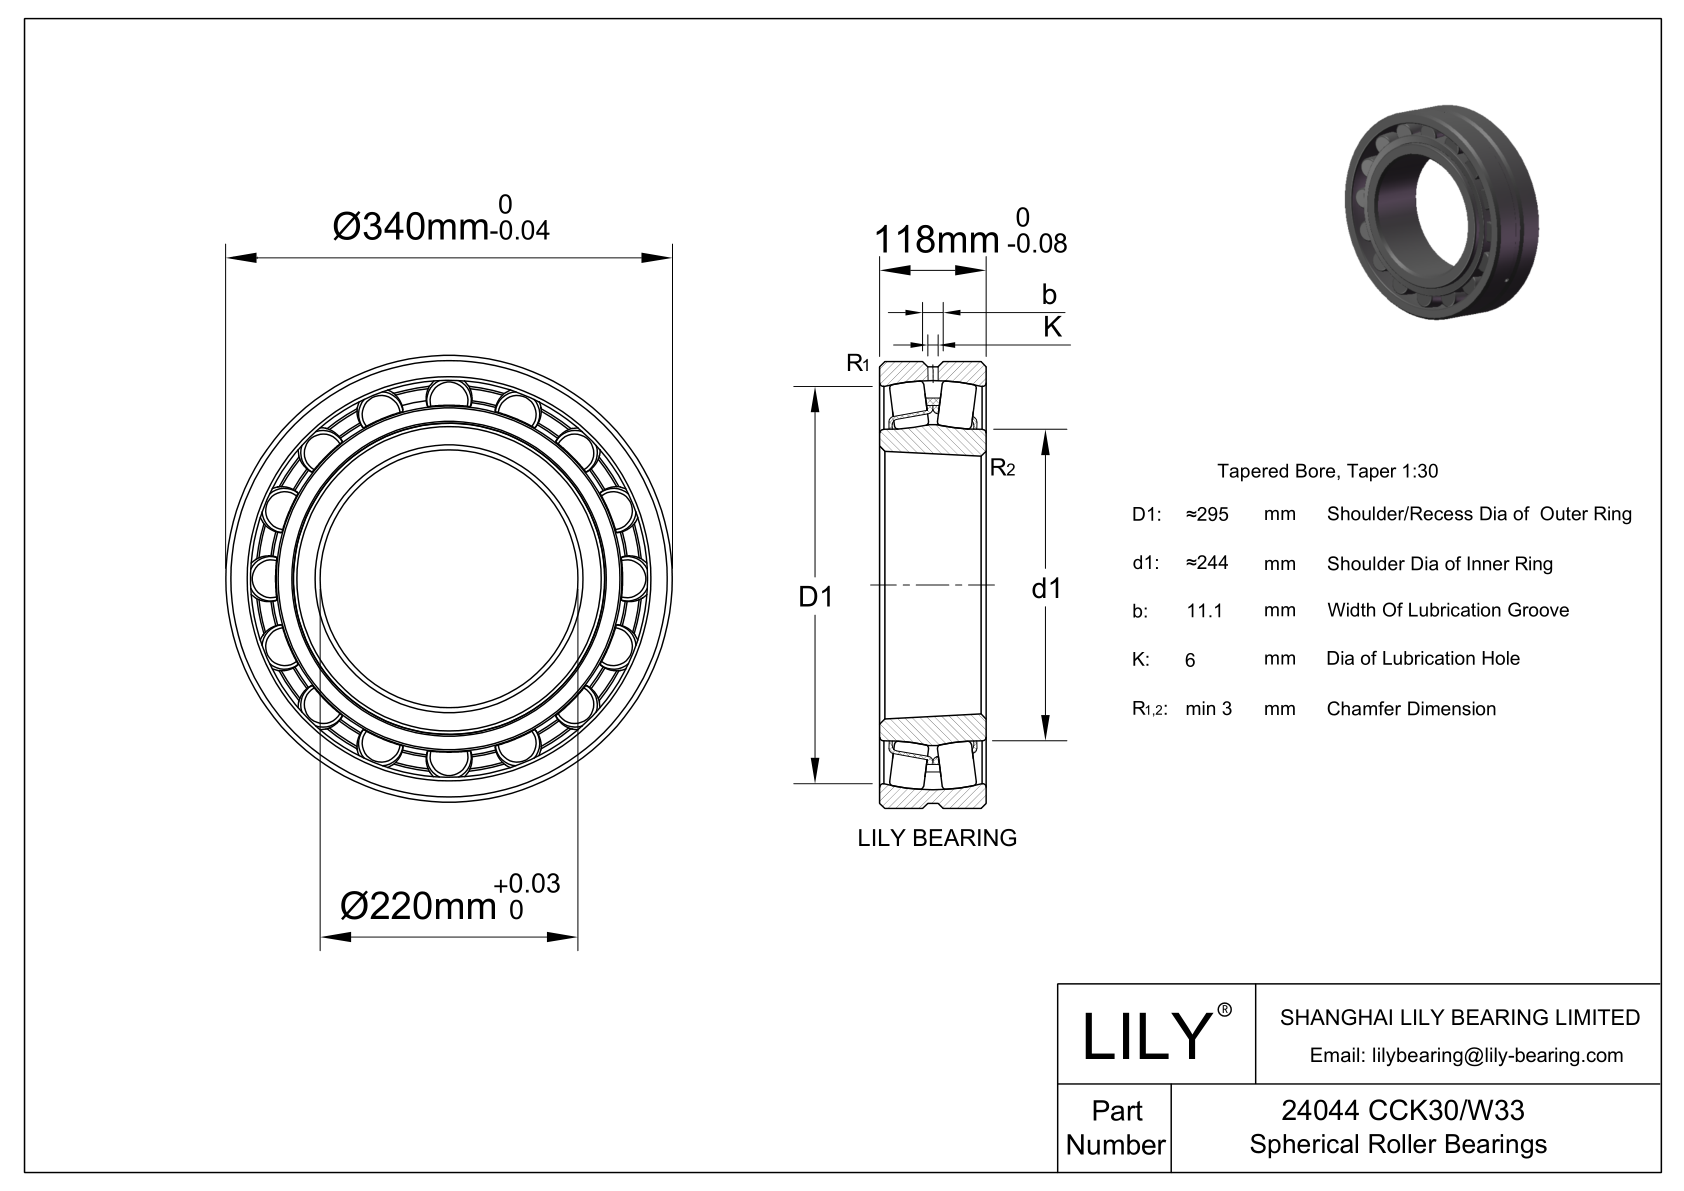 24044 CCK30/W33 Double Row Spherical Roller Bearing cad drawing